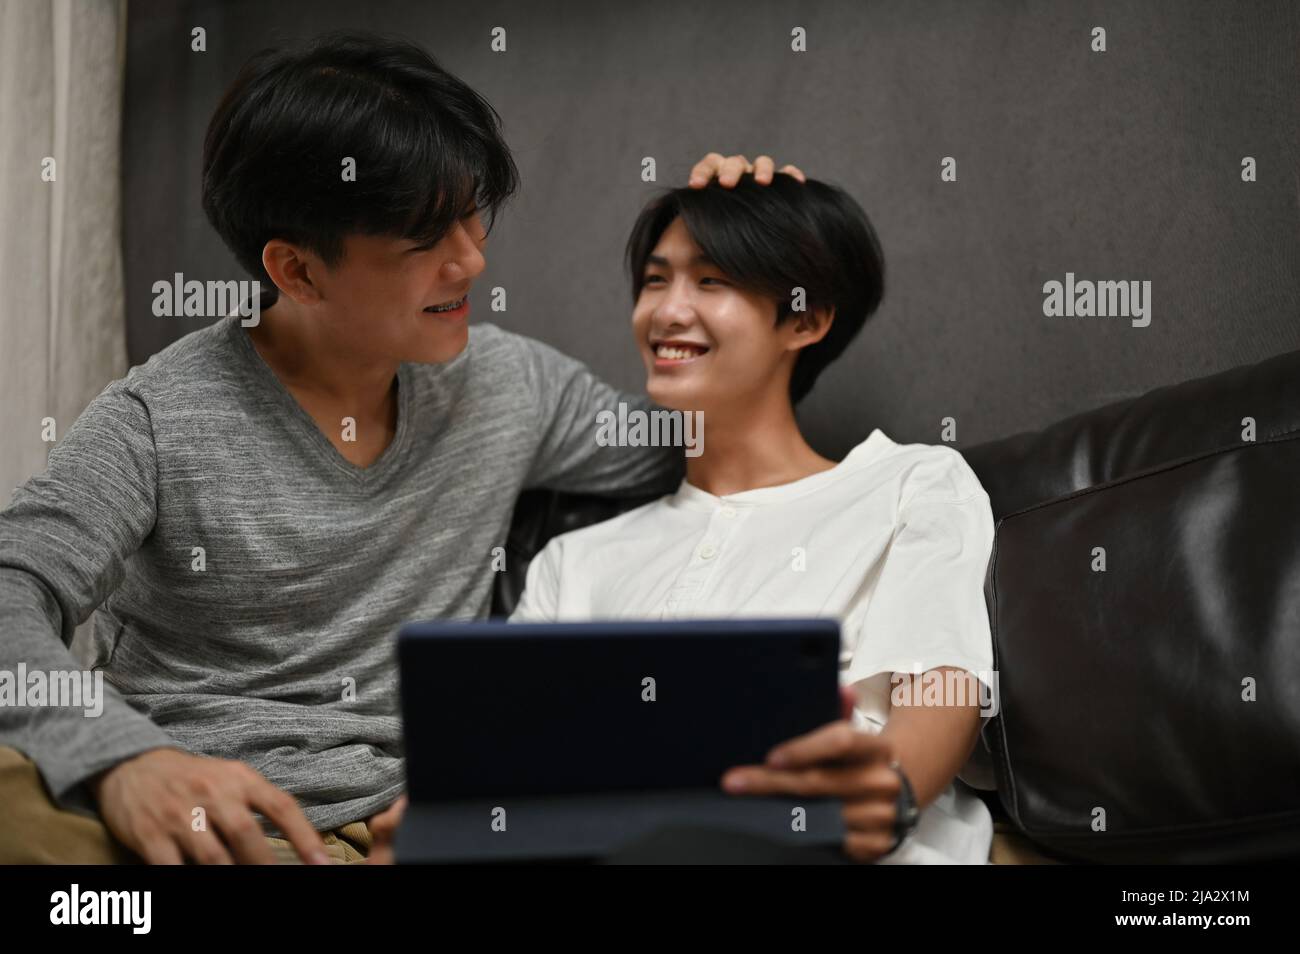 Two asian young gay men couple relaxes in the living room, enjoy watching movie on digital tablet. LGBT lover affection. Stock Photo